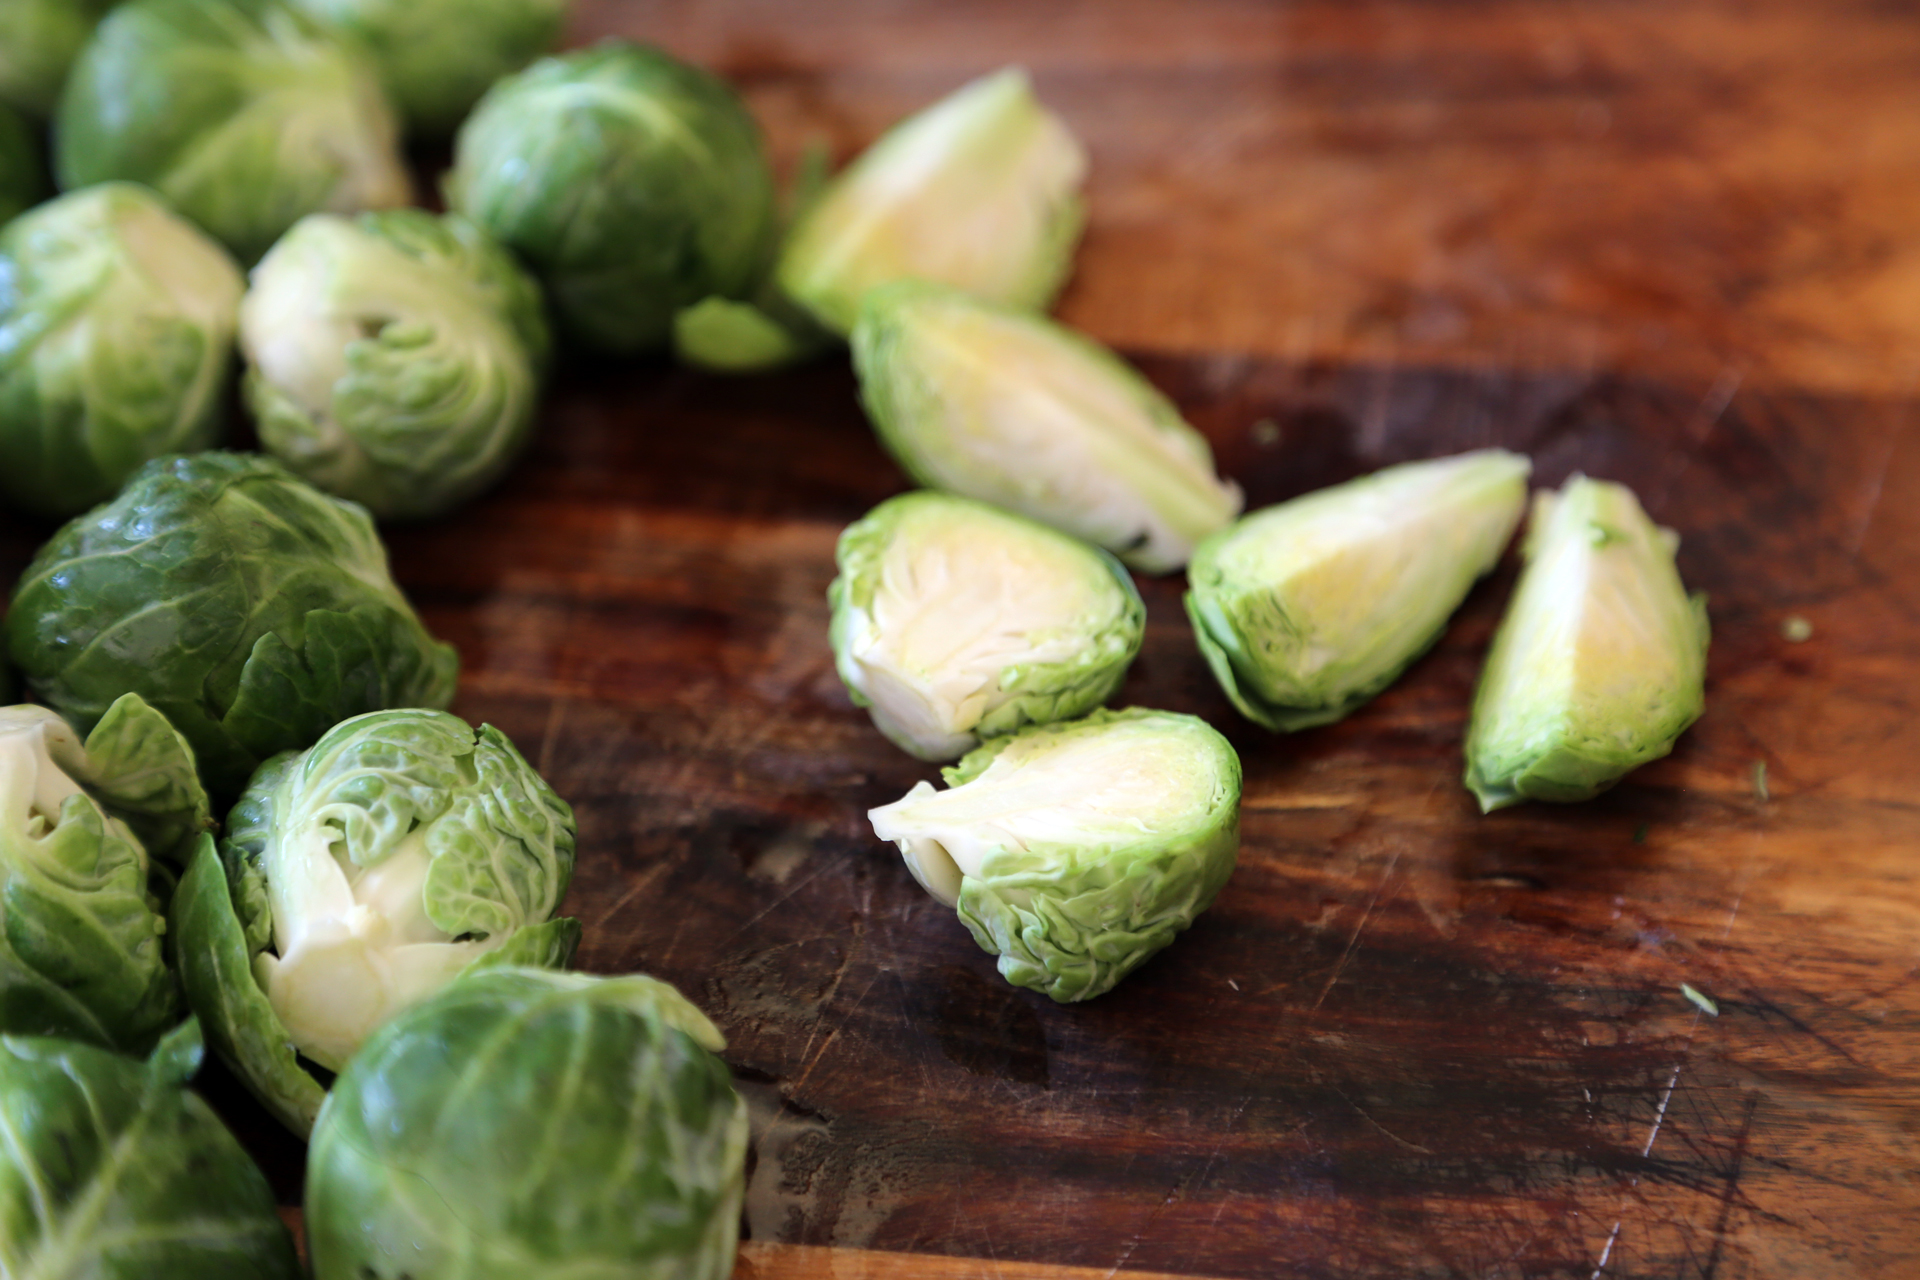 Tender Brussels sprouts, trimmed and halved.